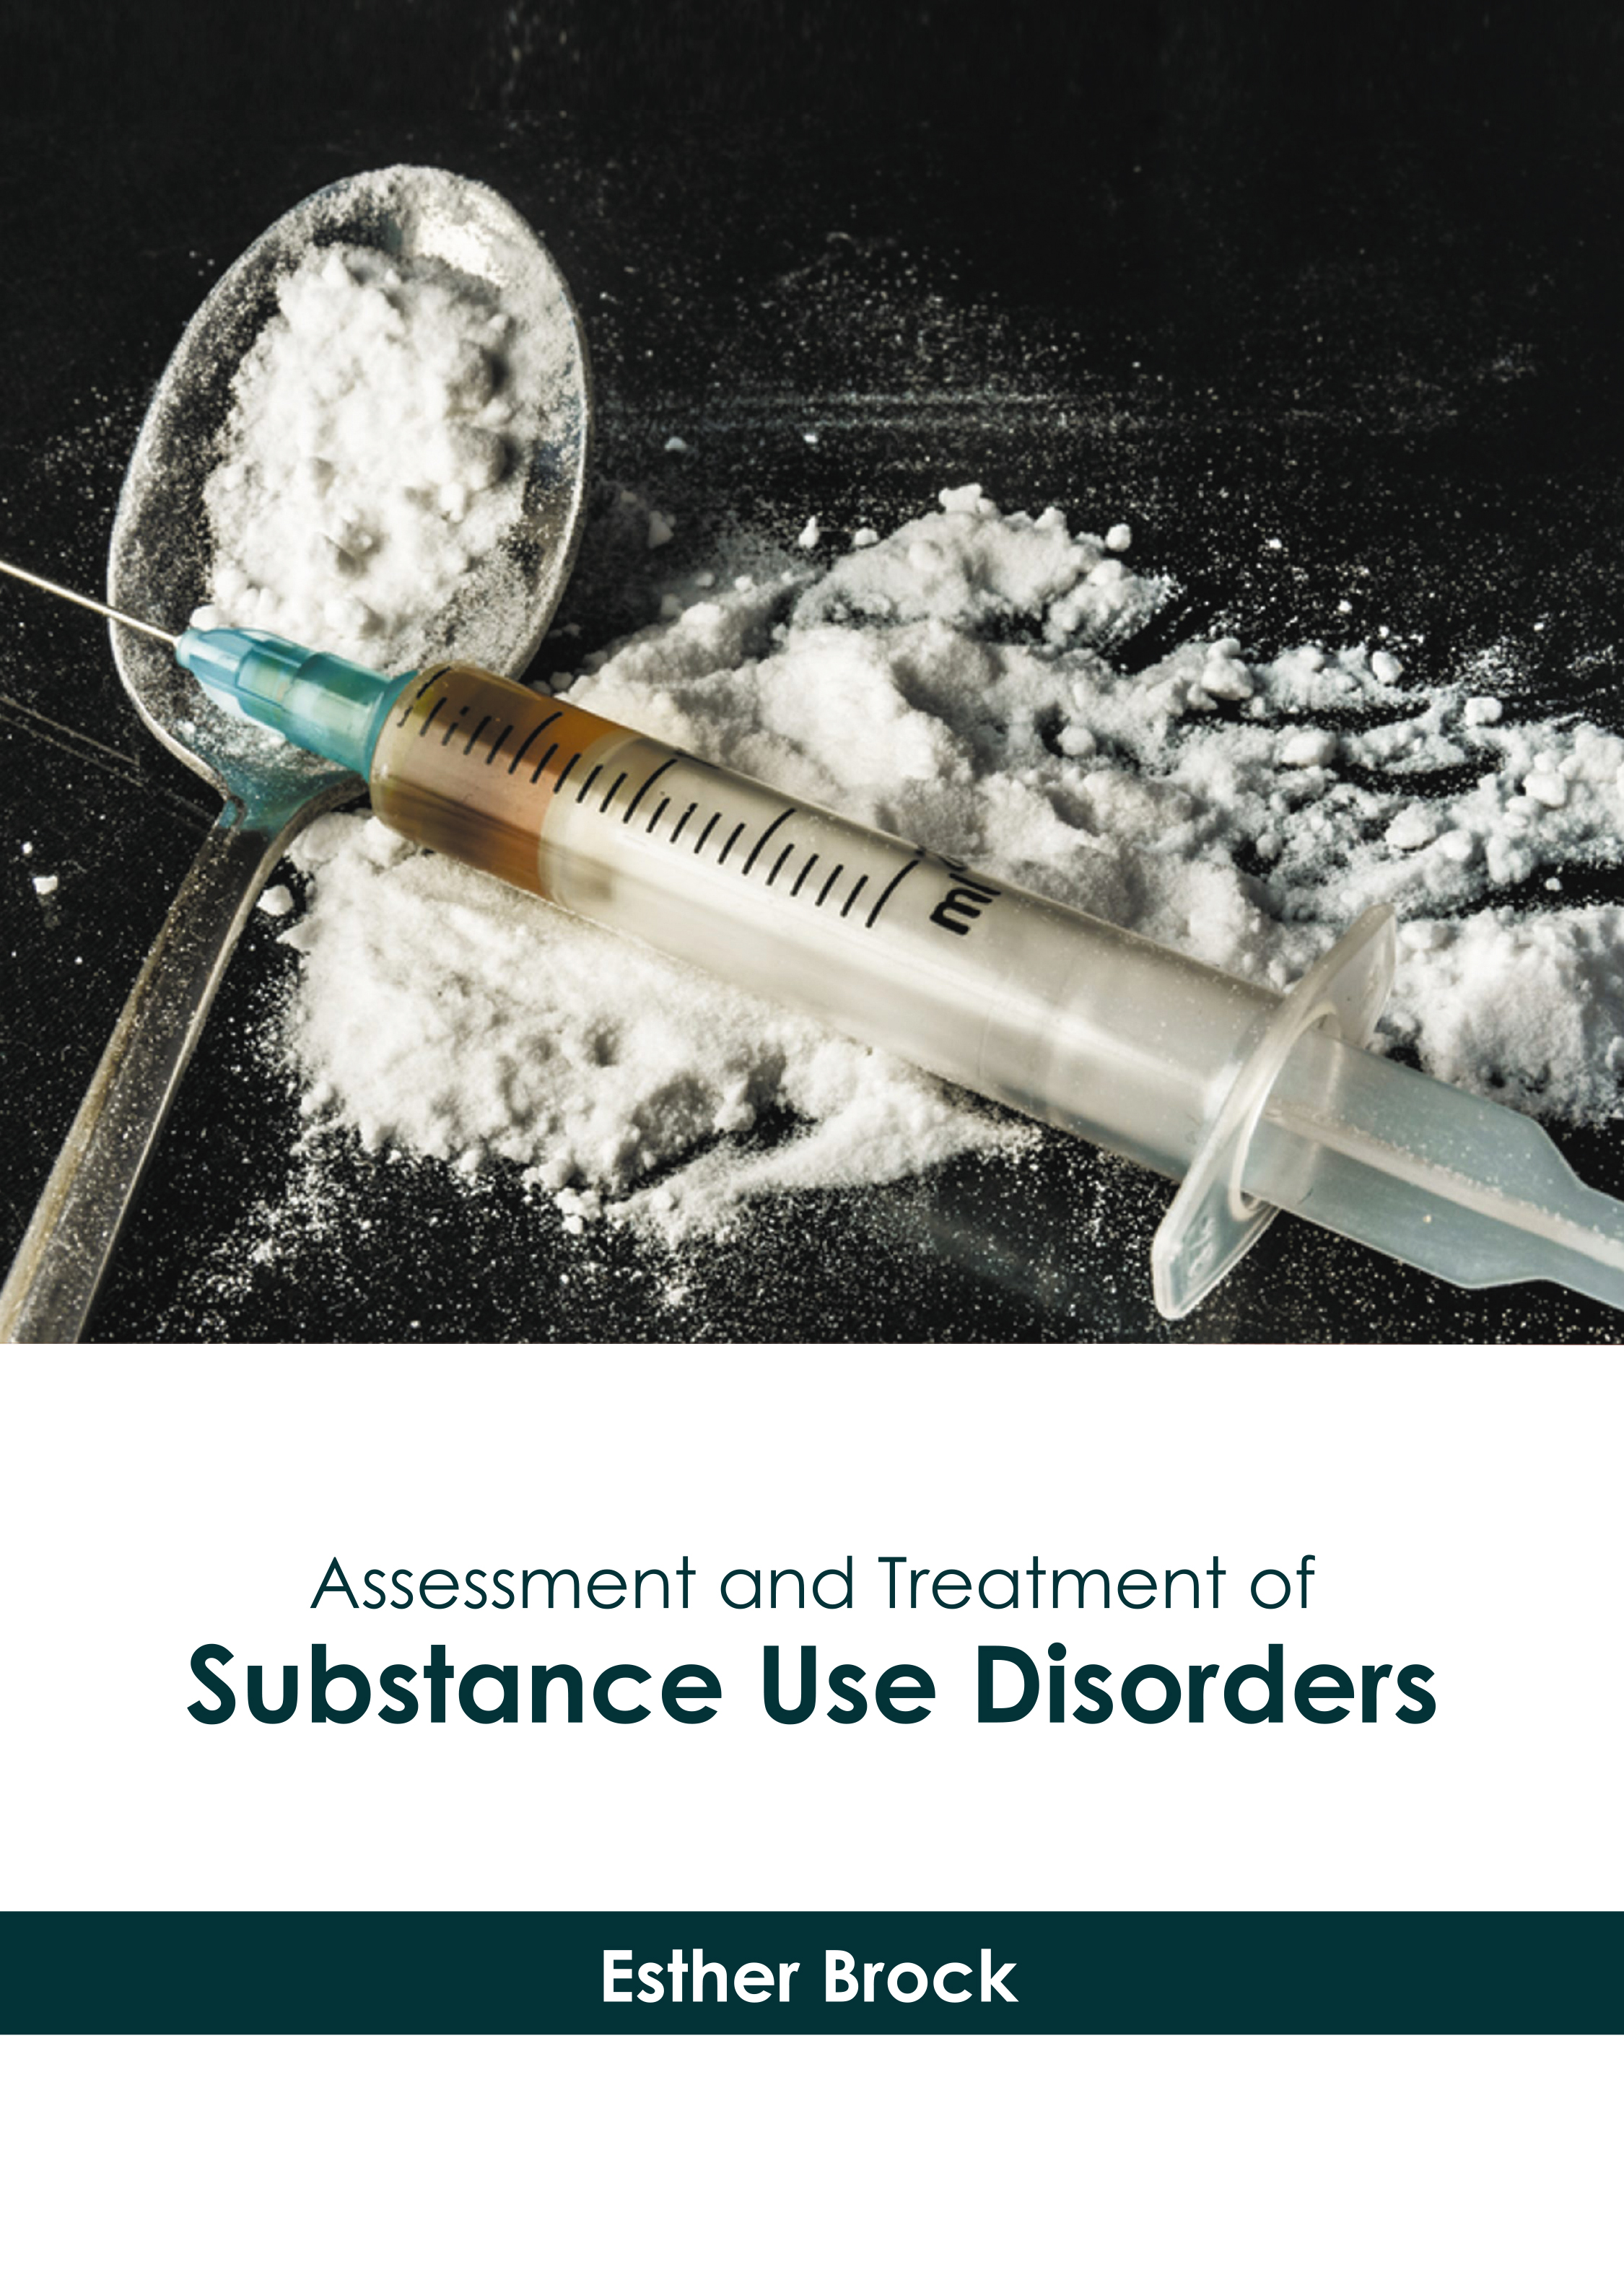 ASSESSMENT AND TREATMENT OF SUBSTANCE USE DISORDERS- ISBN: 9781639270897